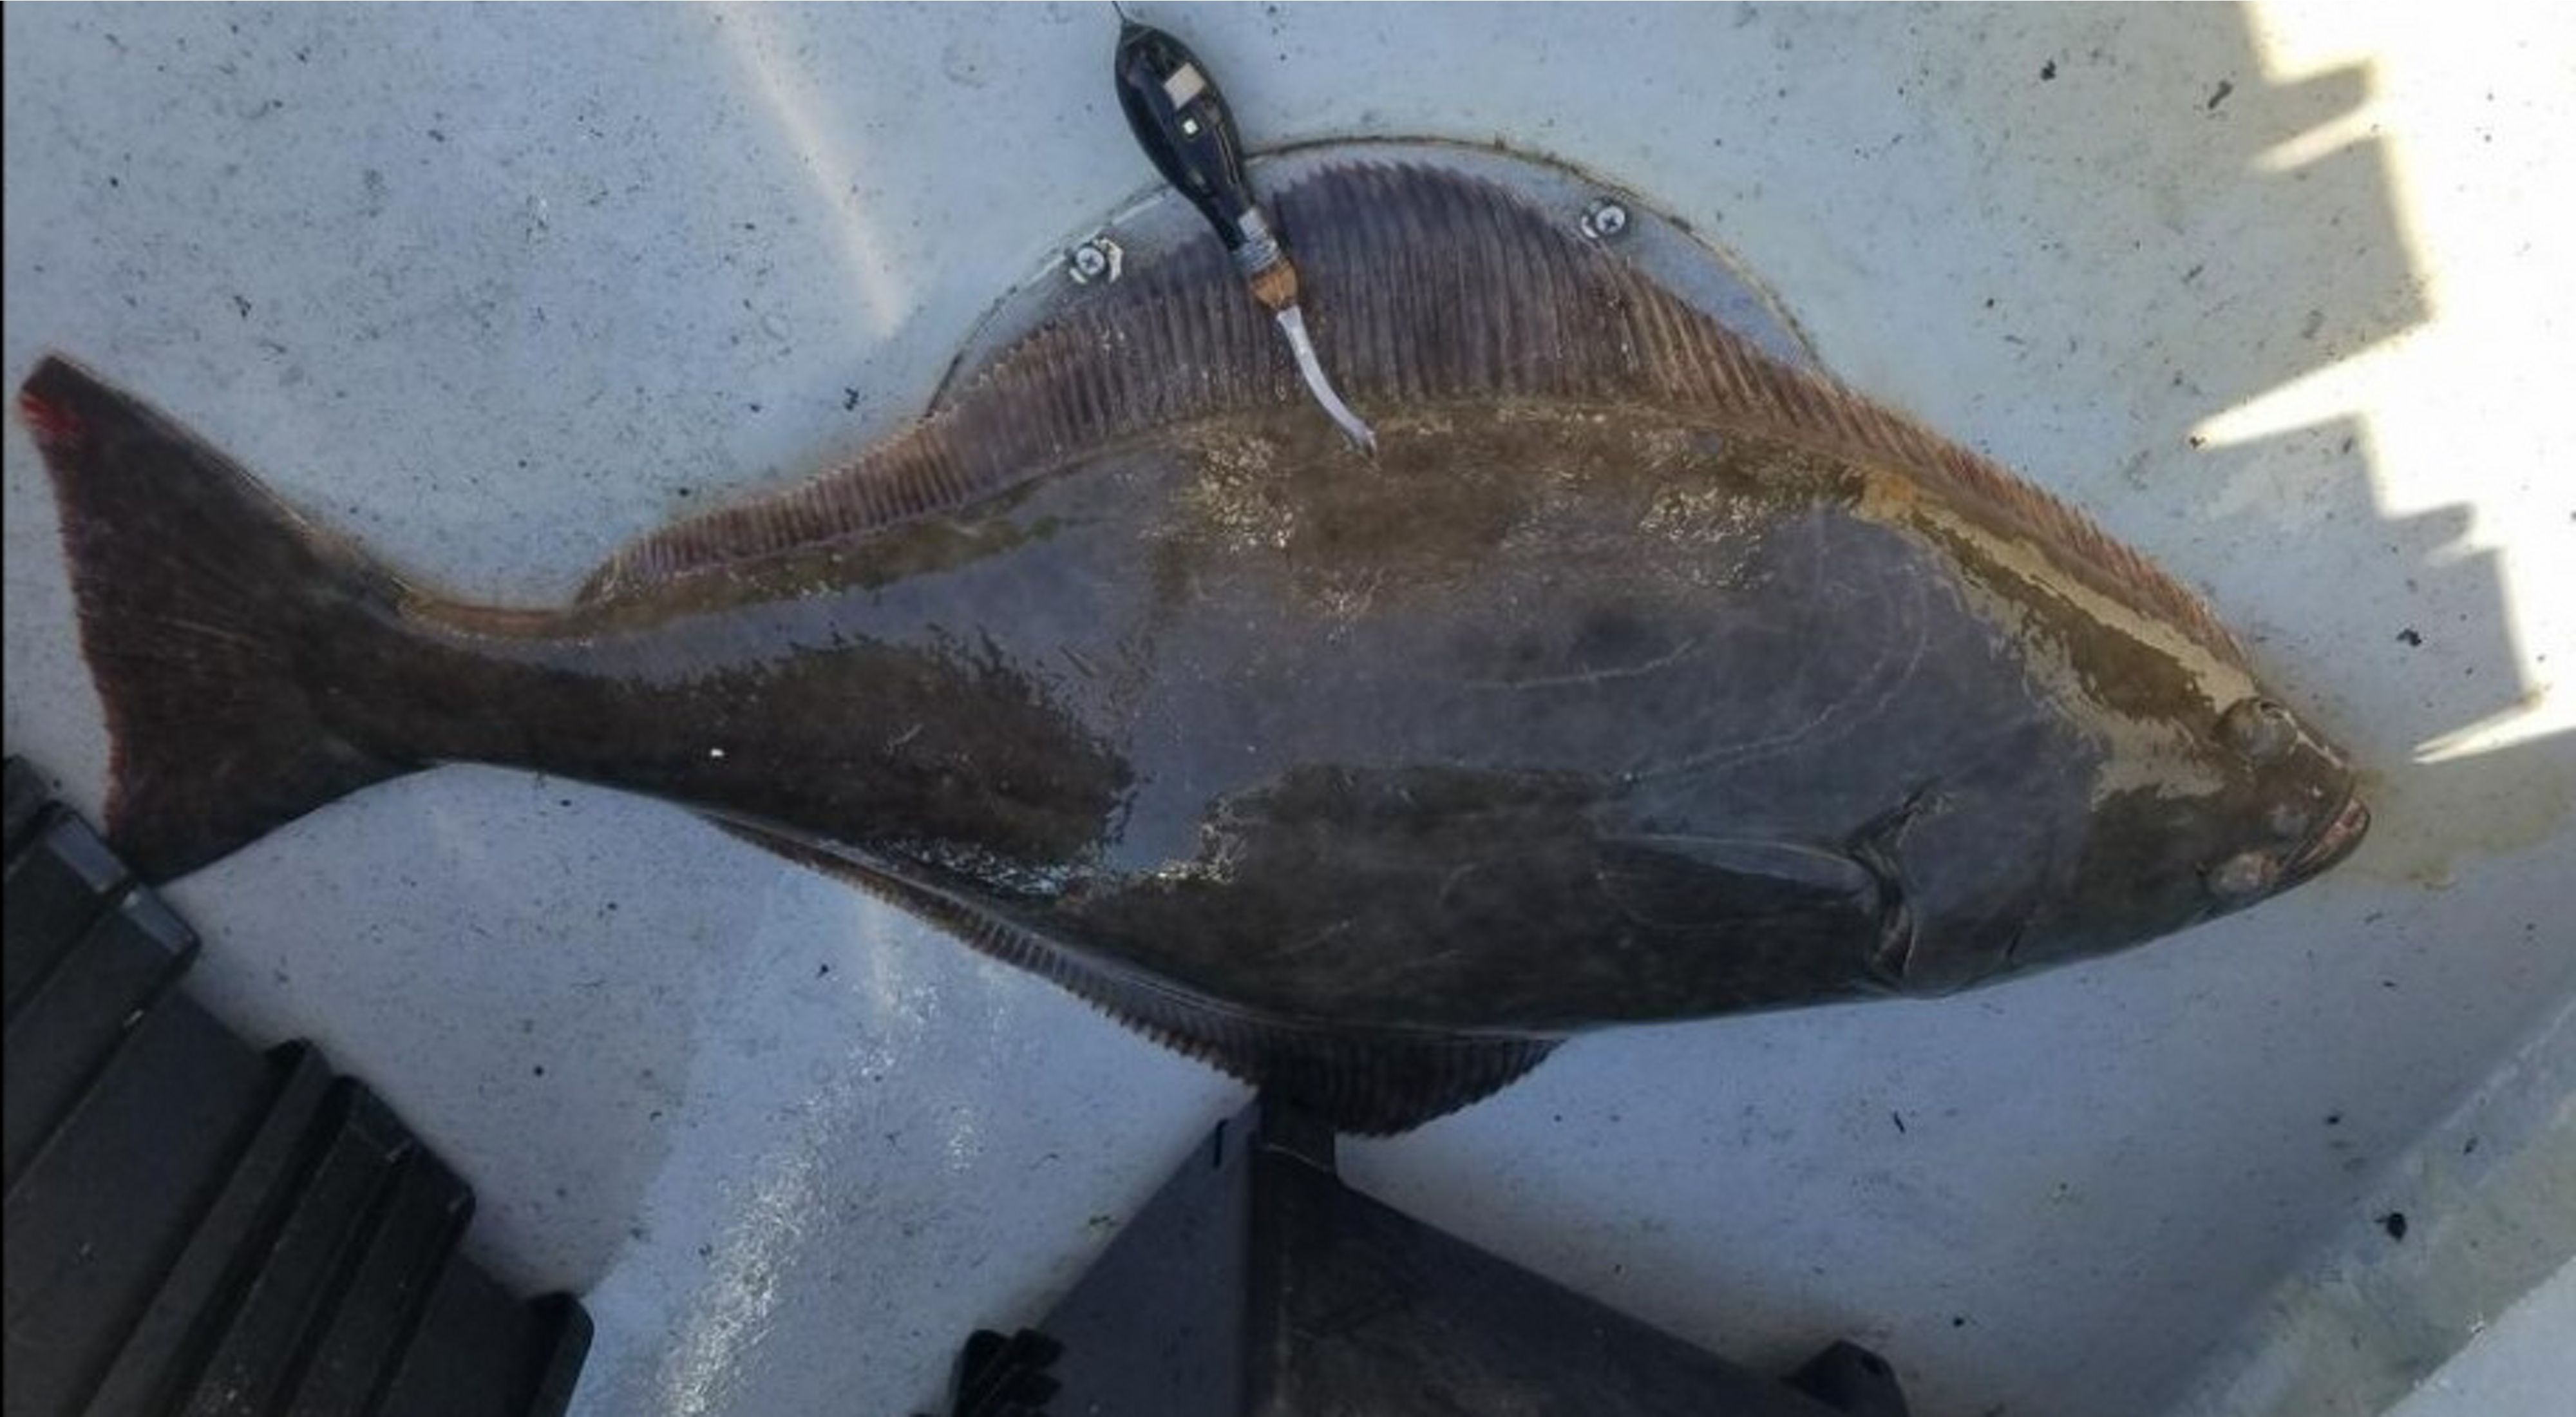 Close up of a large gray halibut on the deck of a boat, with a tracking tag in its dorsal fin.